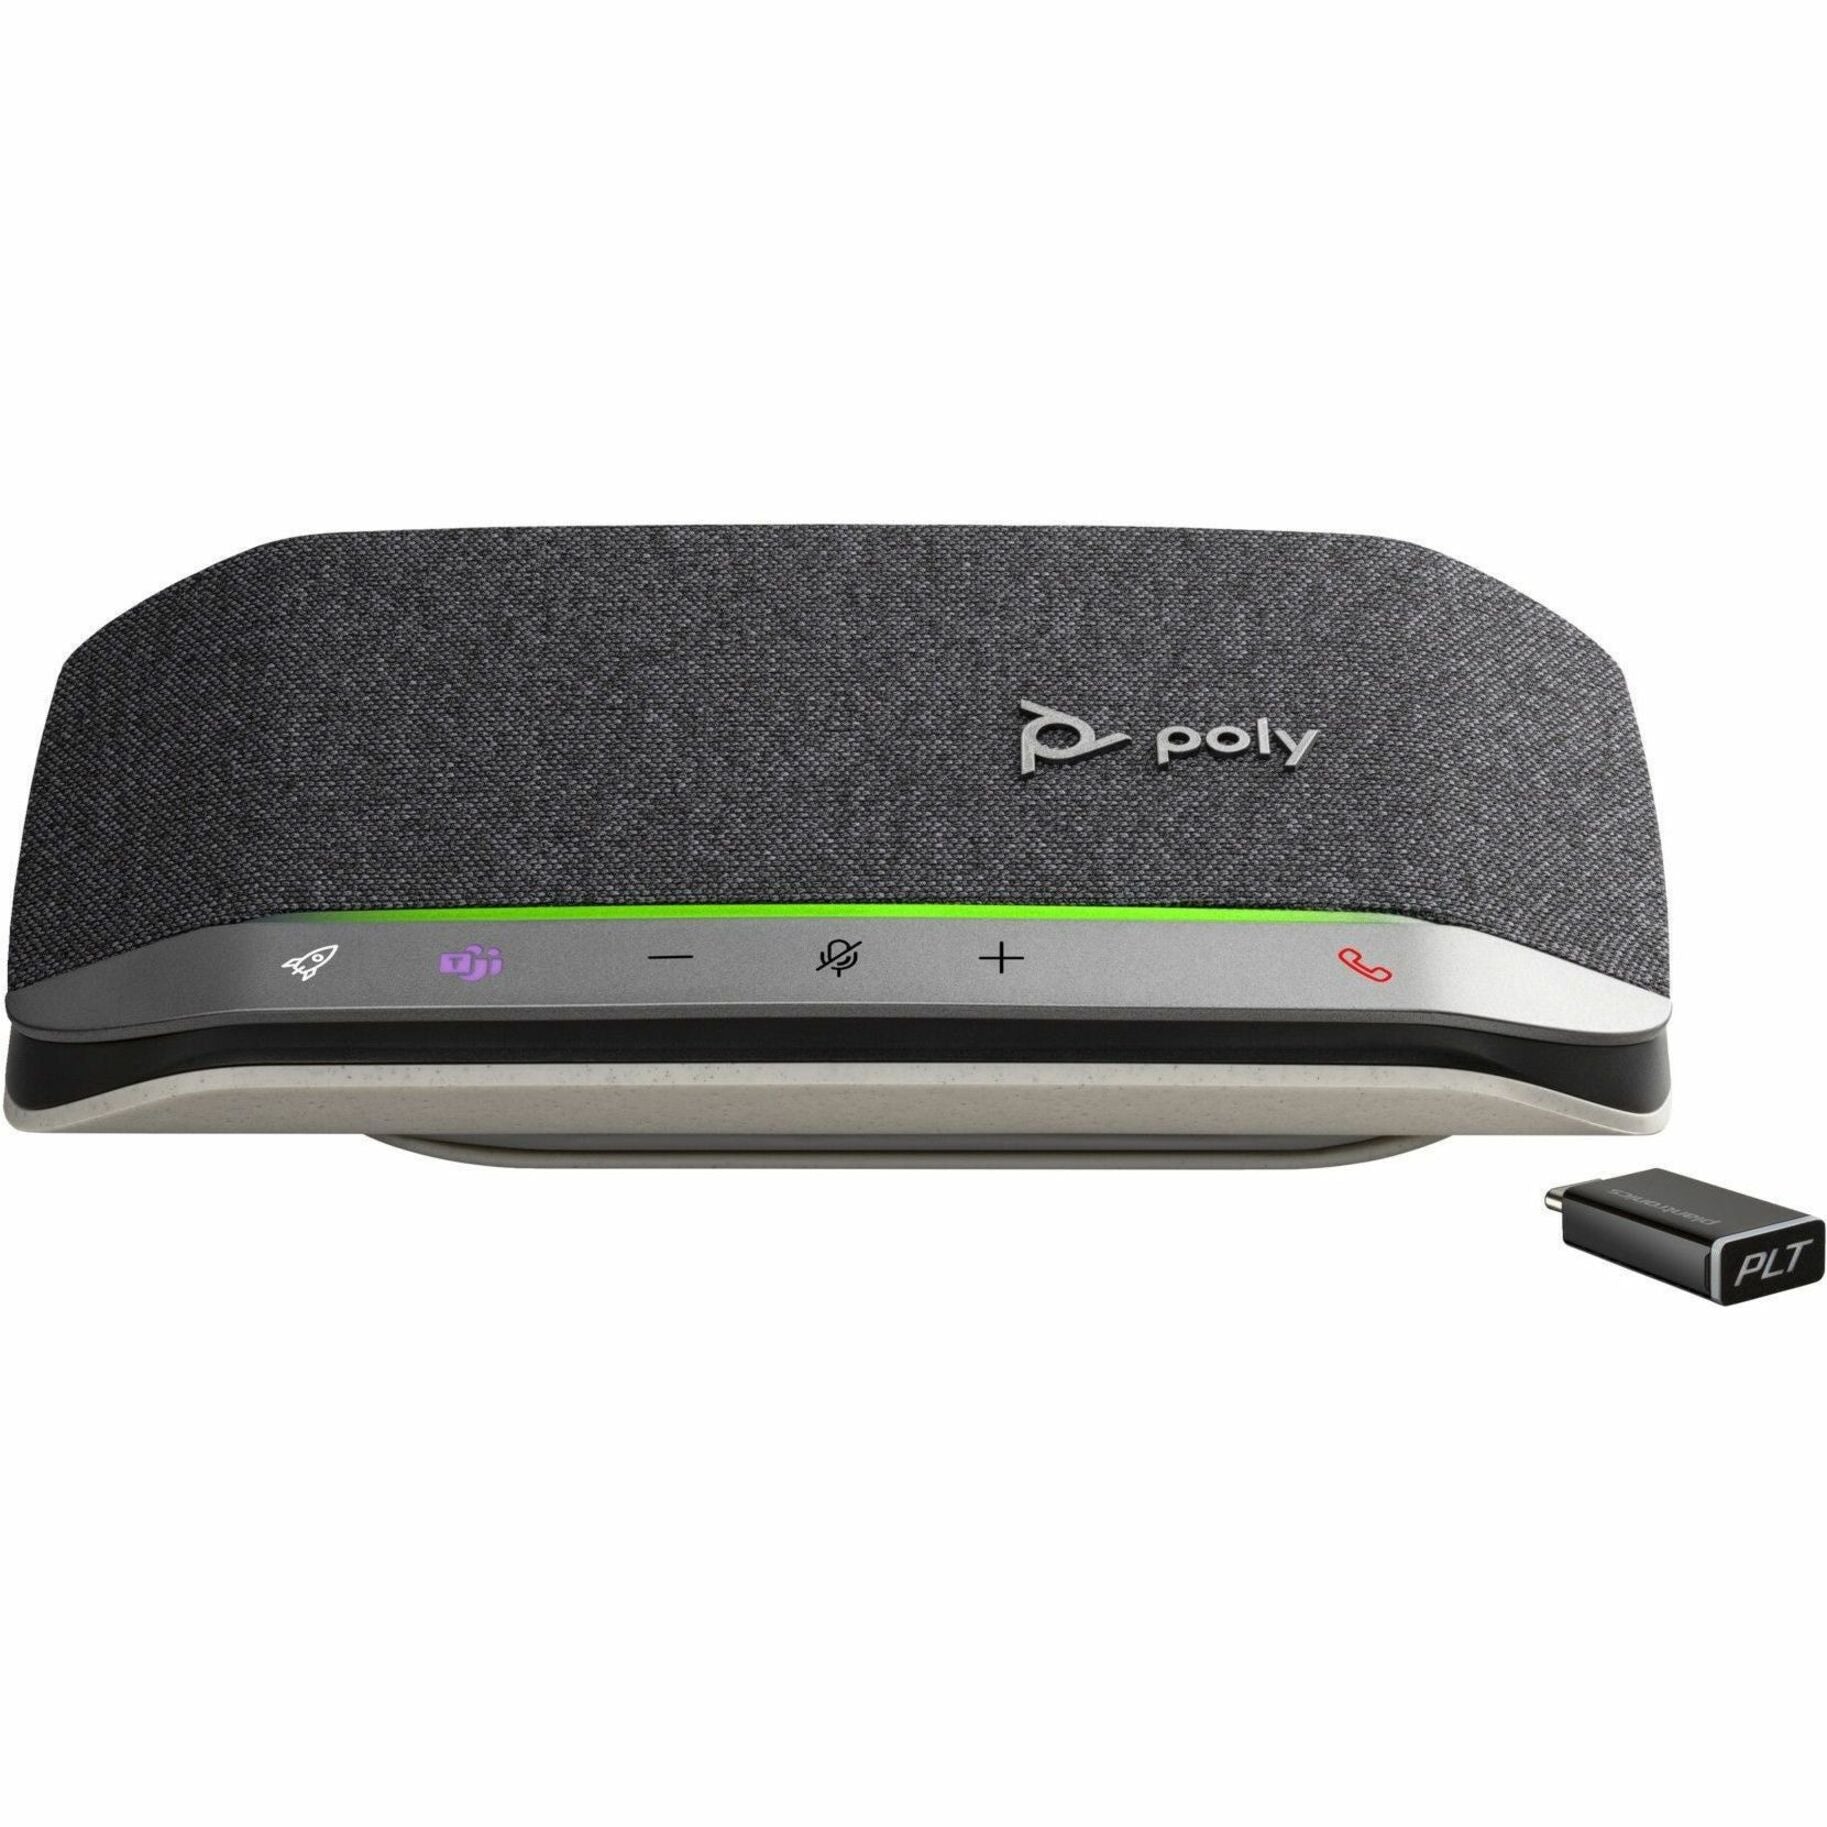 Poly 772D1AA Sync 20+ Microsoft Teams Certified USB-C Speakerphone, Rechargeable, Full-duplex, Bluetooth, Conferencing